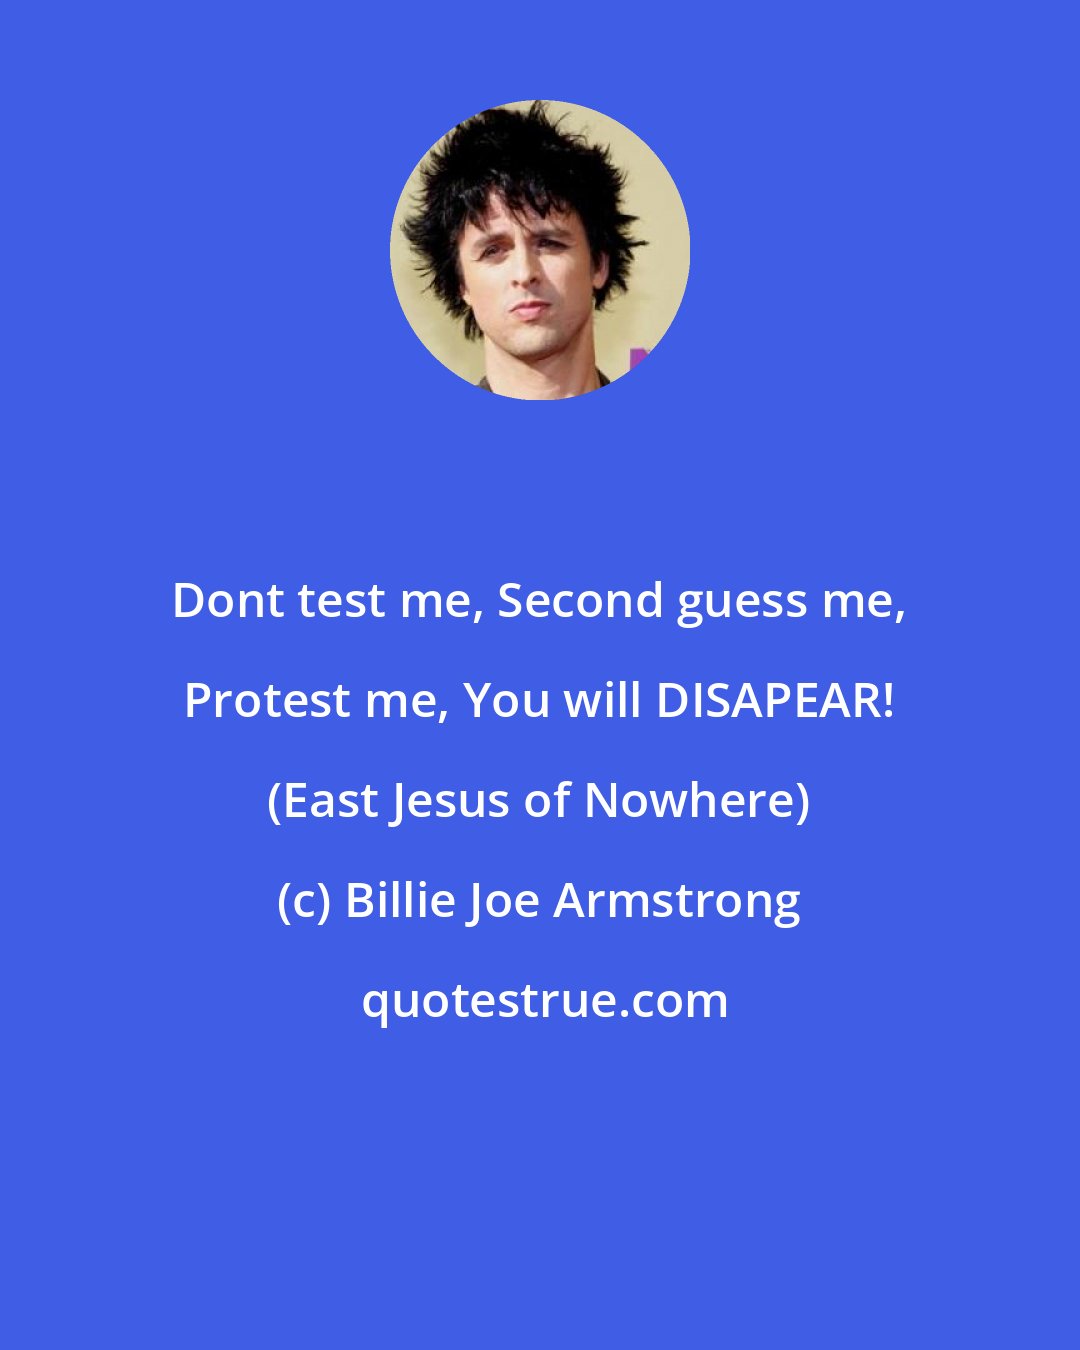 Billie Joe Armstrong: Dont test me, Second guess me, Protest me, You will DISAPEAR! (East Jesus of Nowhere)